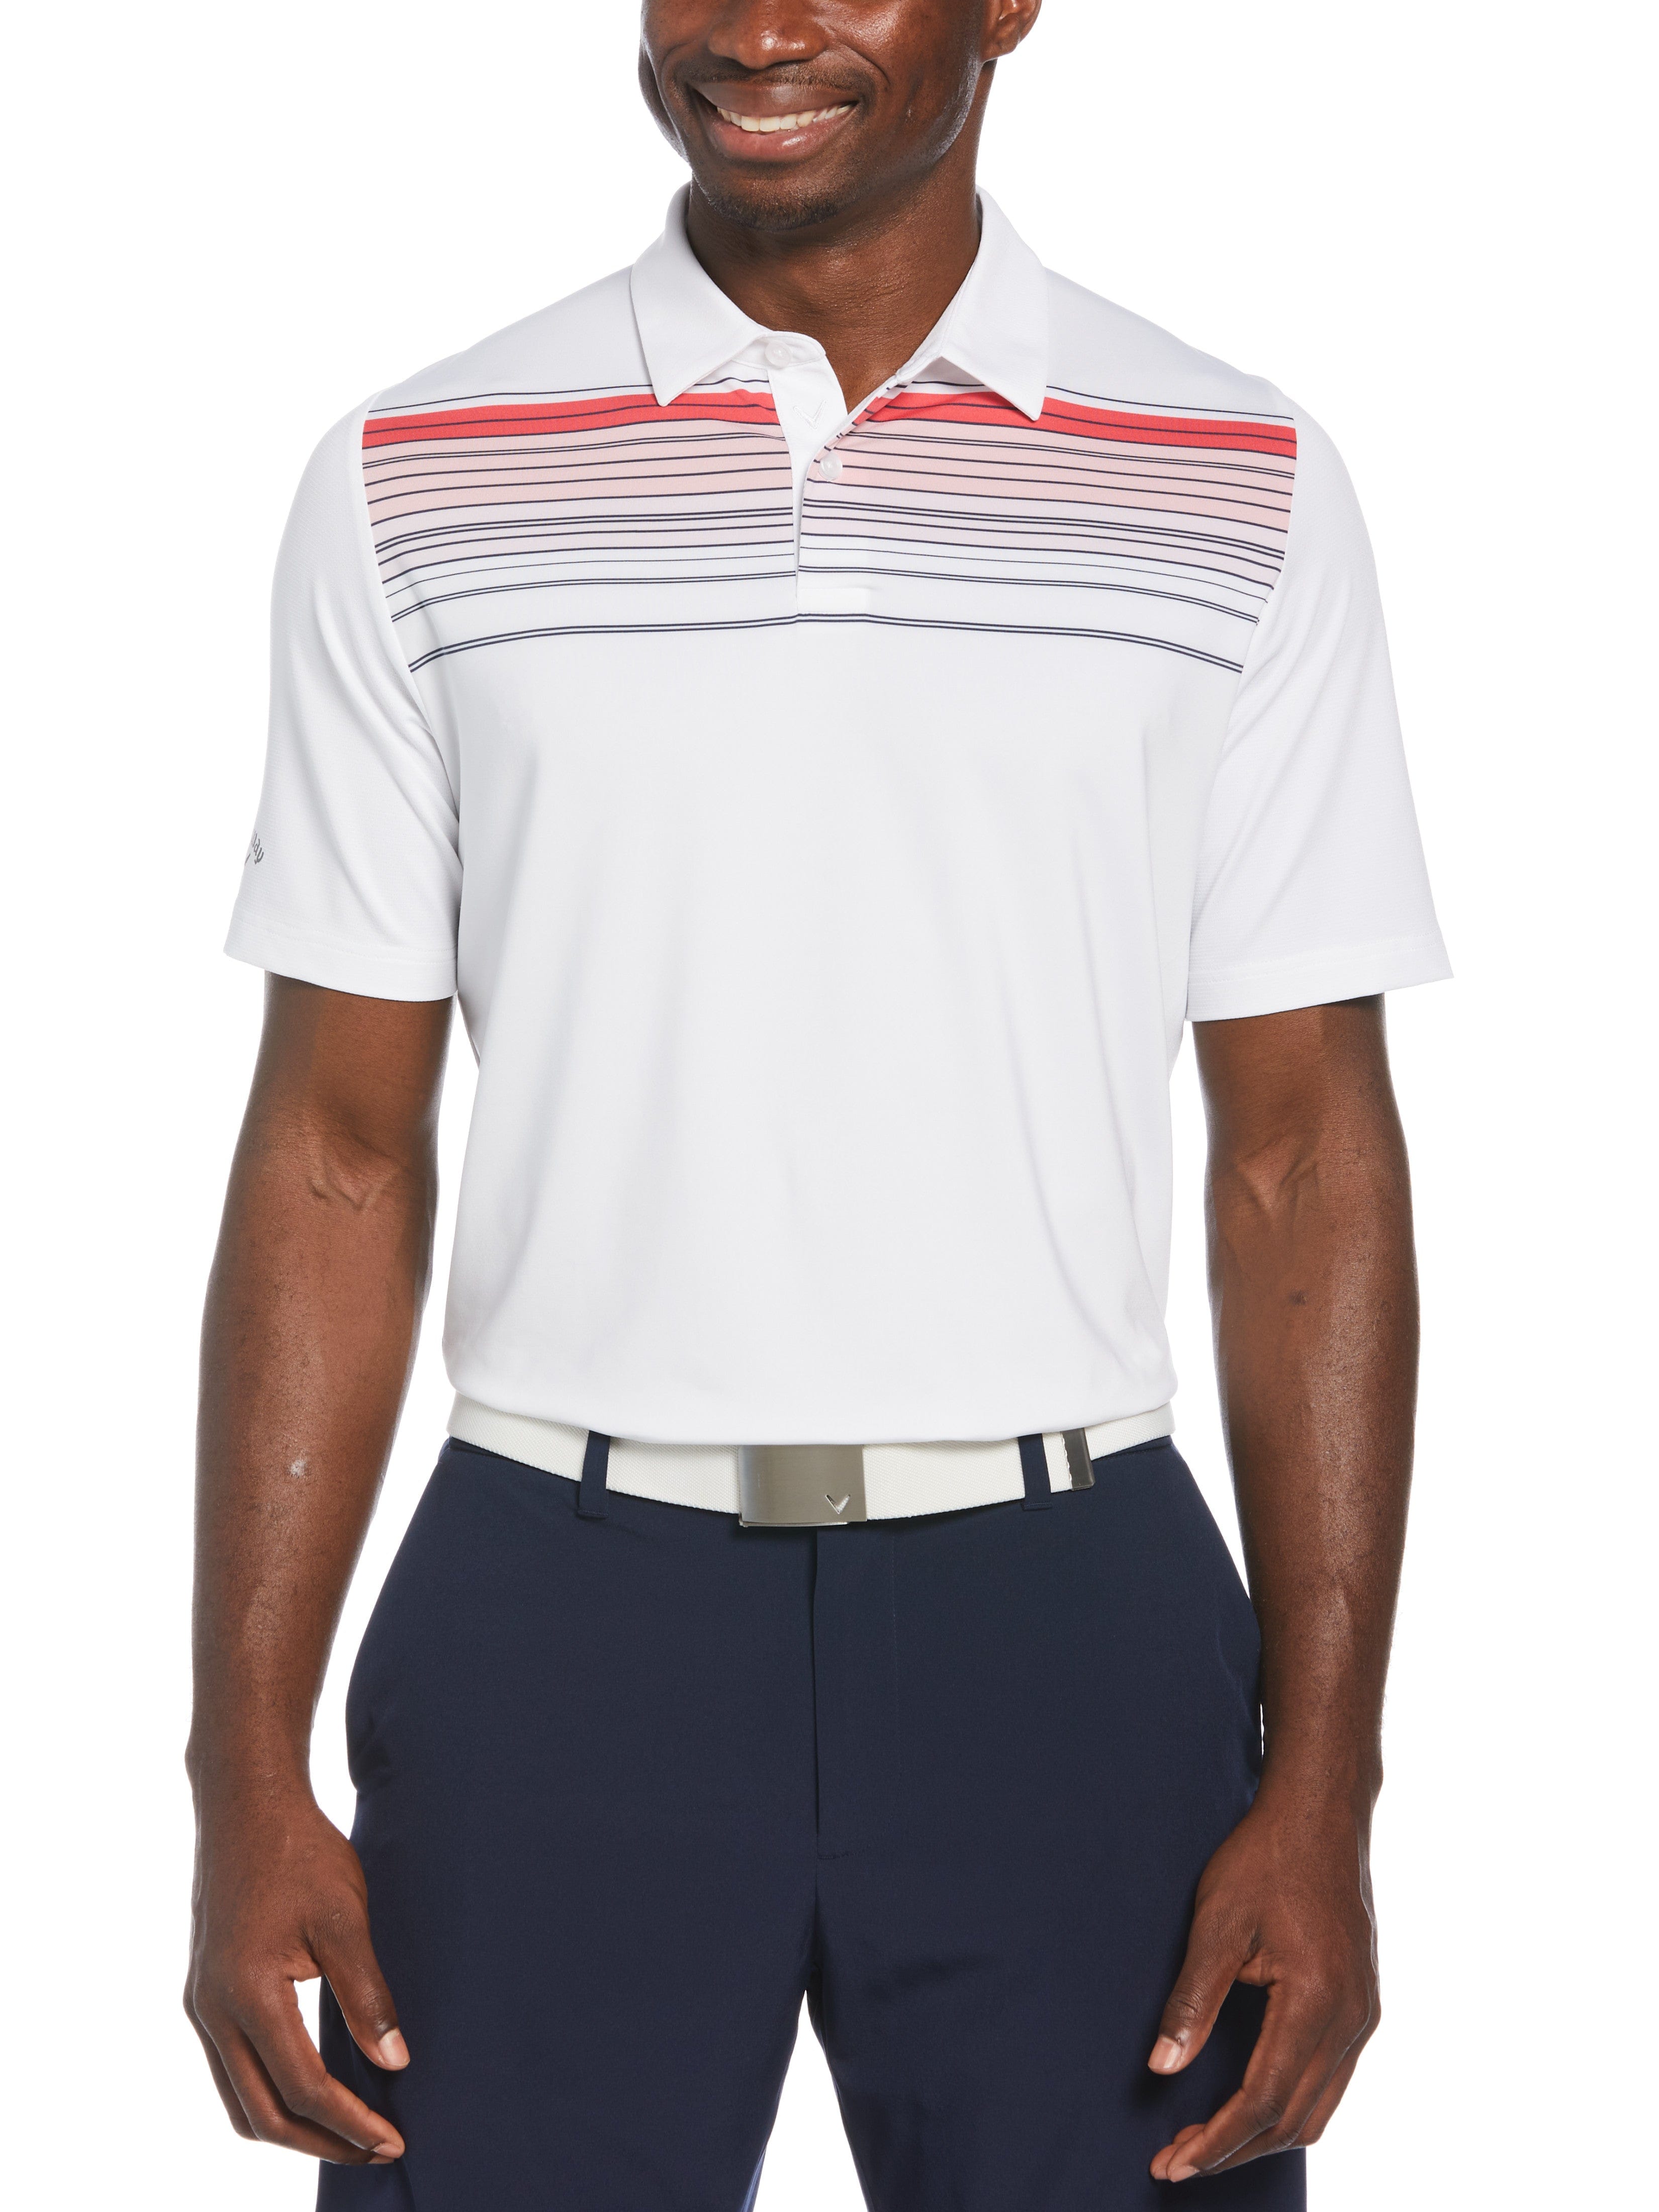 Callaway Apparel Mens Yarn Dyed Energized Engineered Stripe Golf Polo Shirt, Size Small, White, Polyester/Recycled Polyester/Elastane